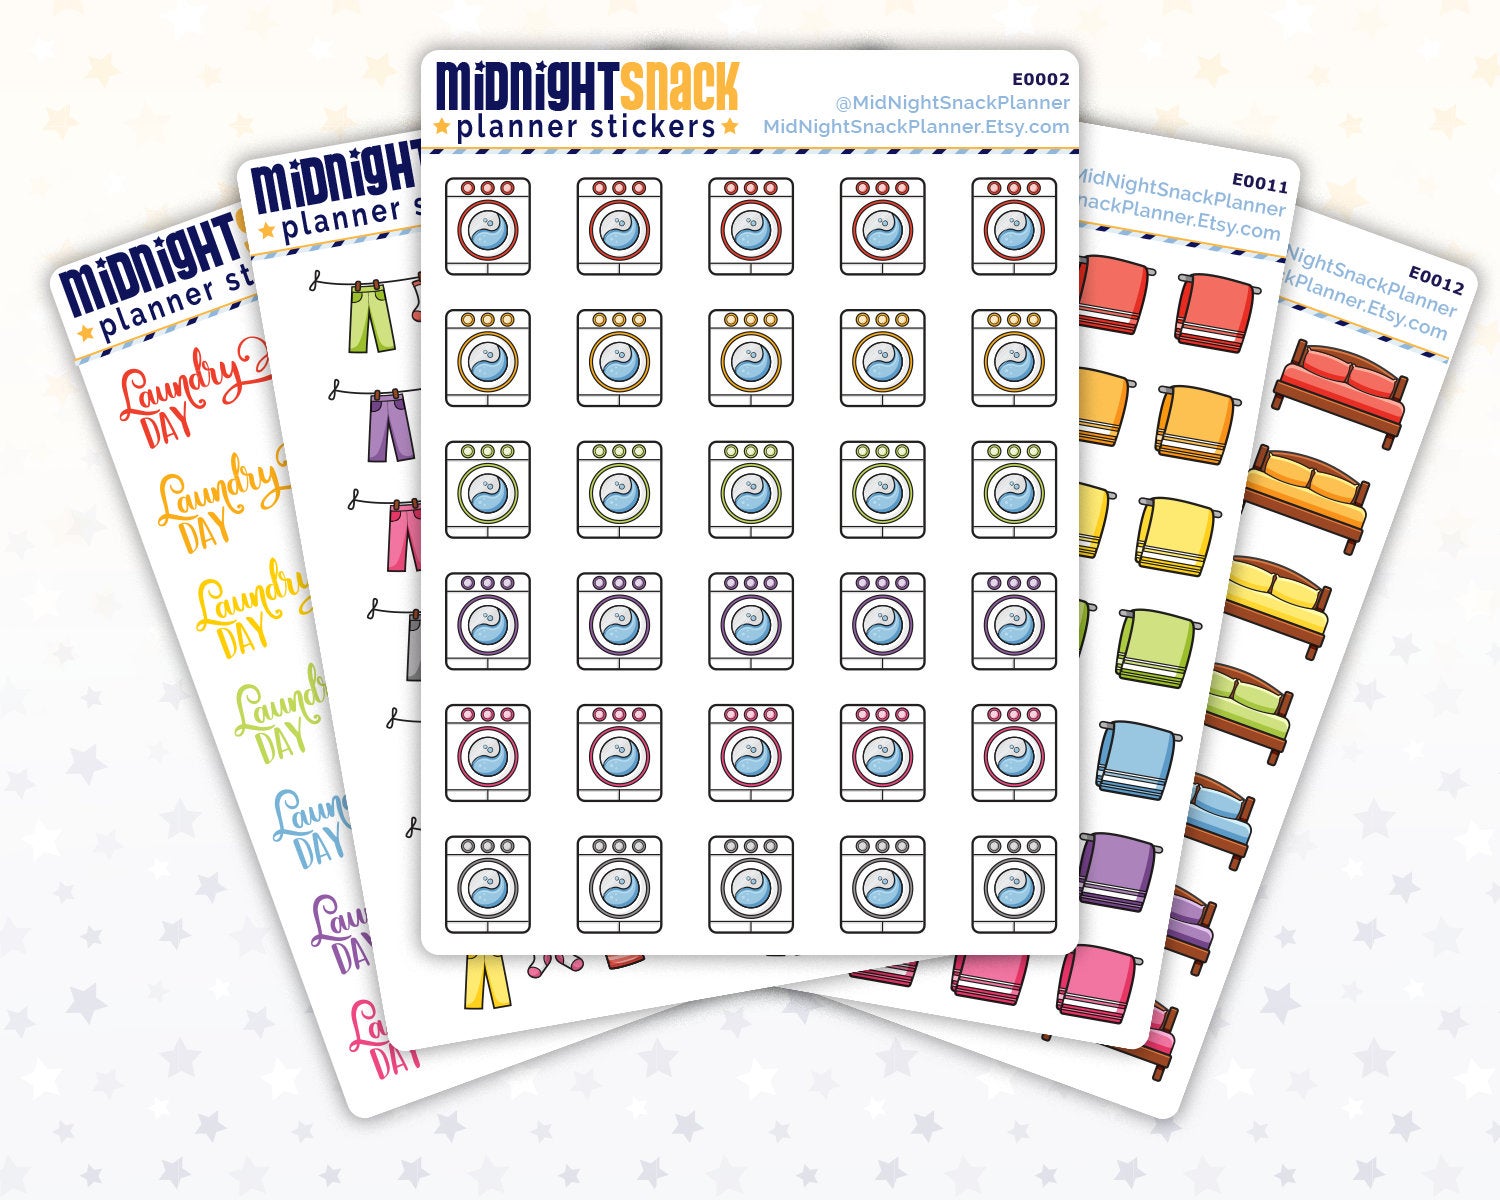 5 Sheet Bundle of Laundry Planner Stickers from Midnight Snack Planner